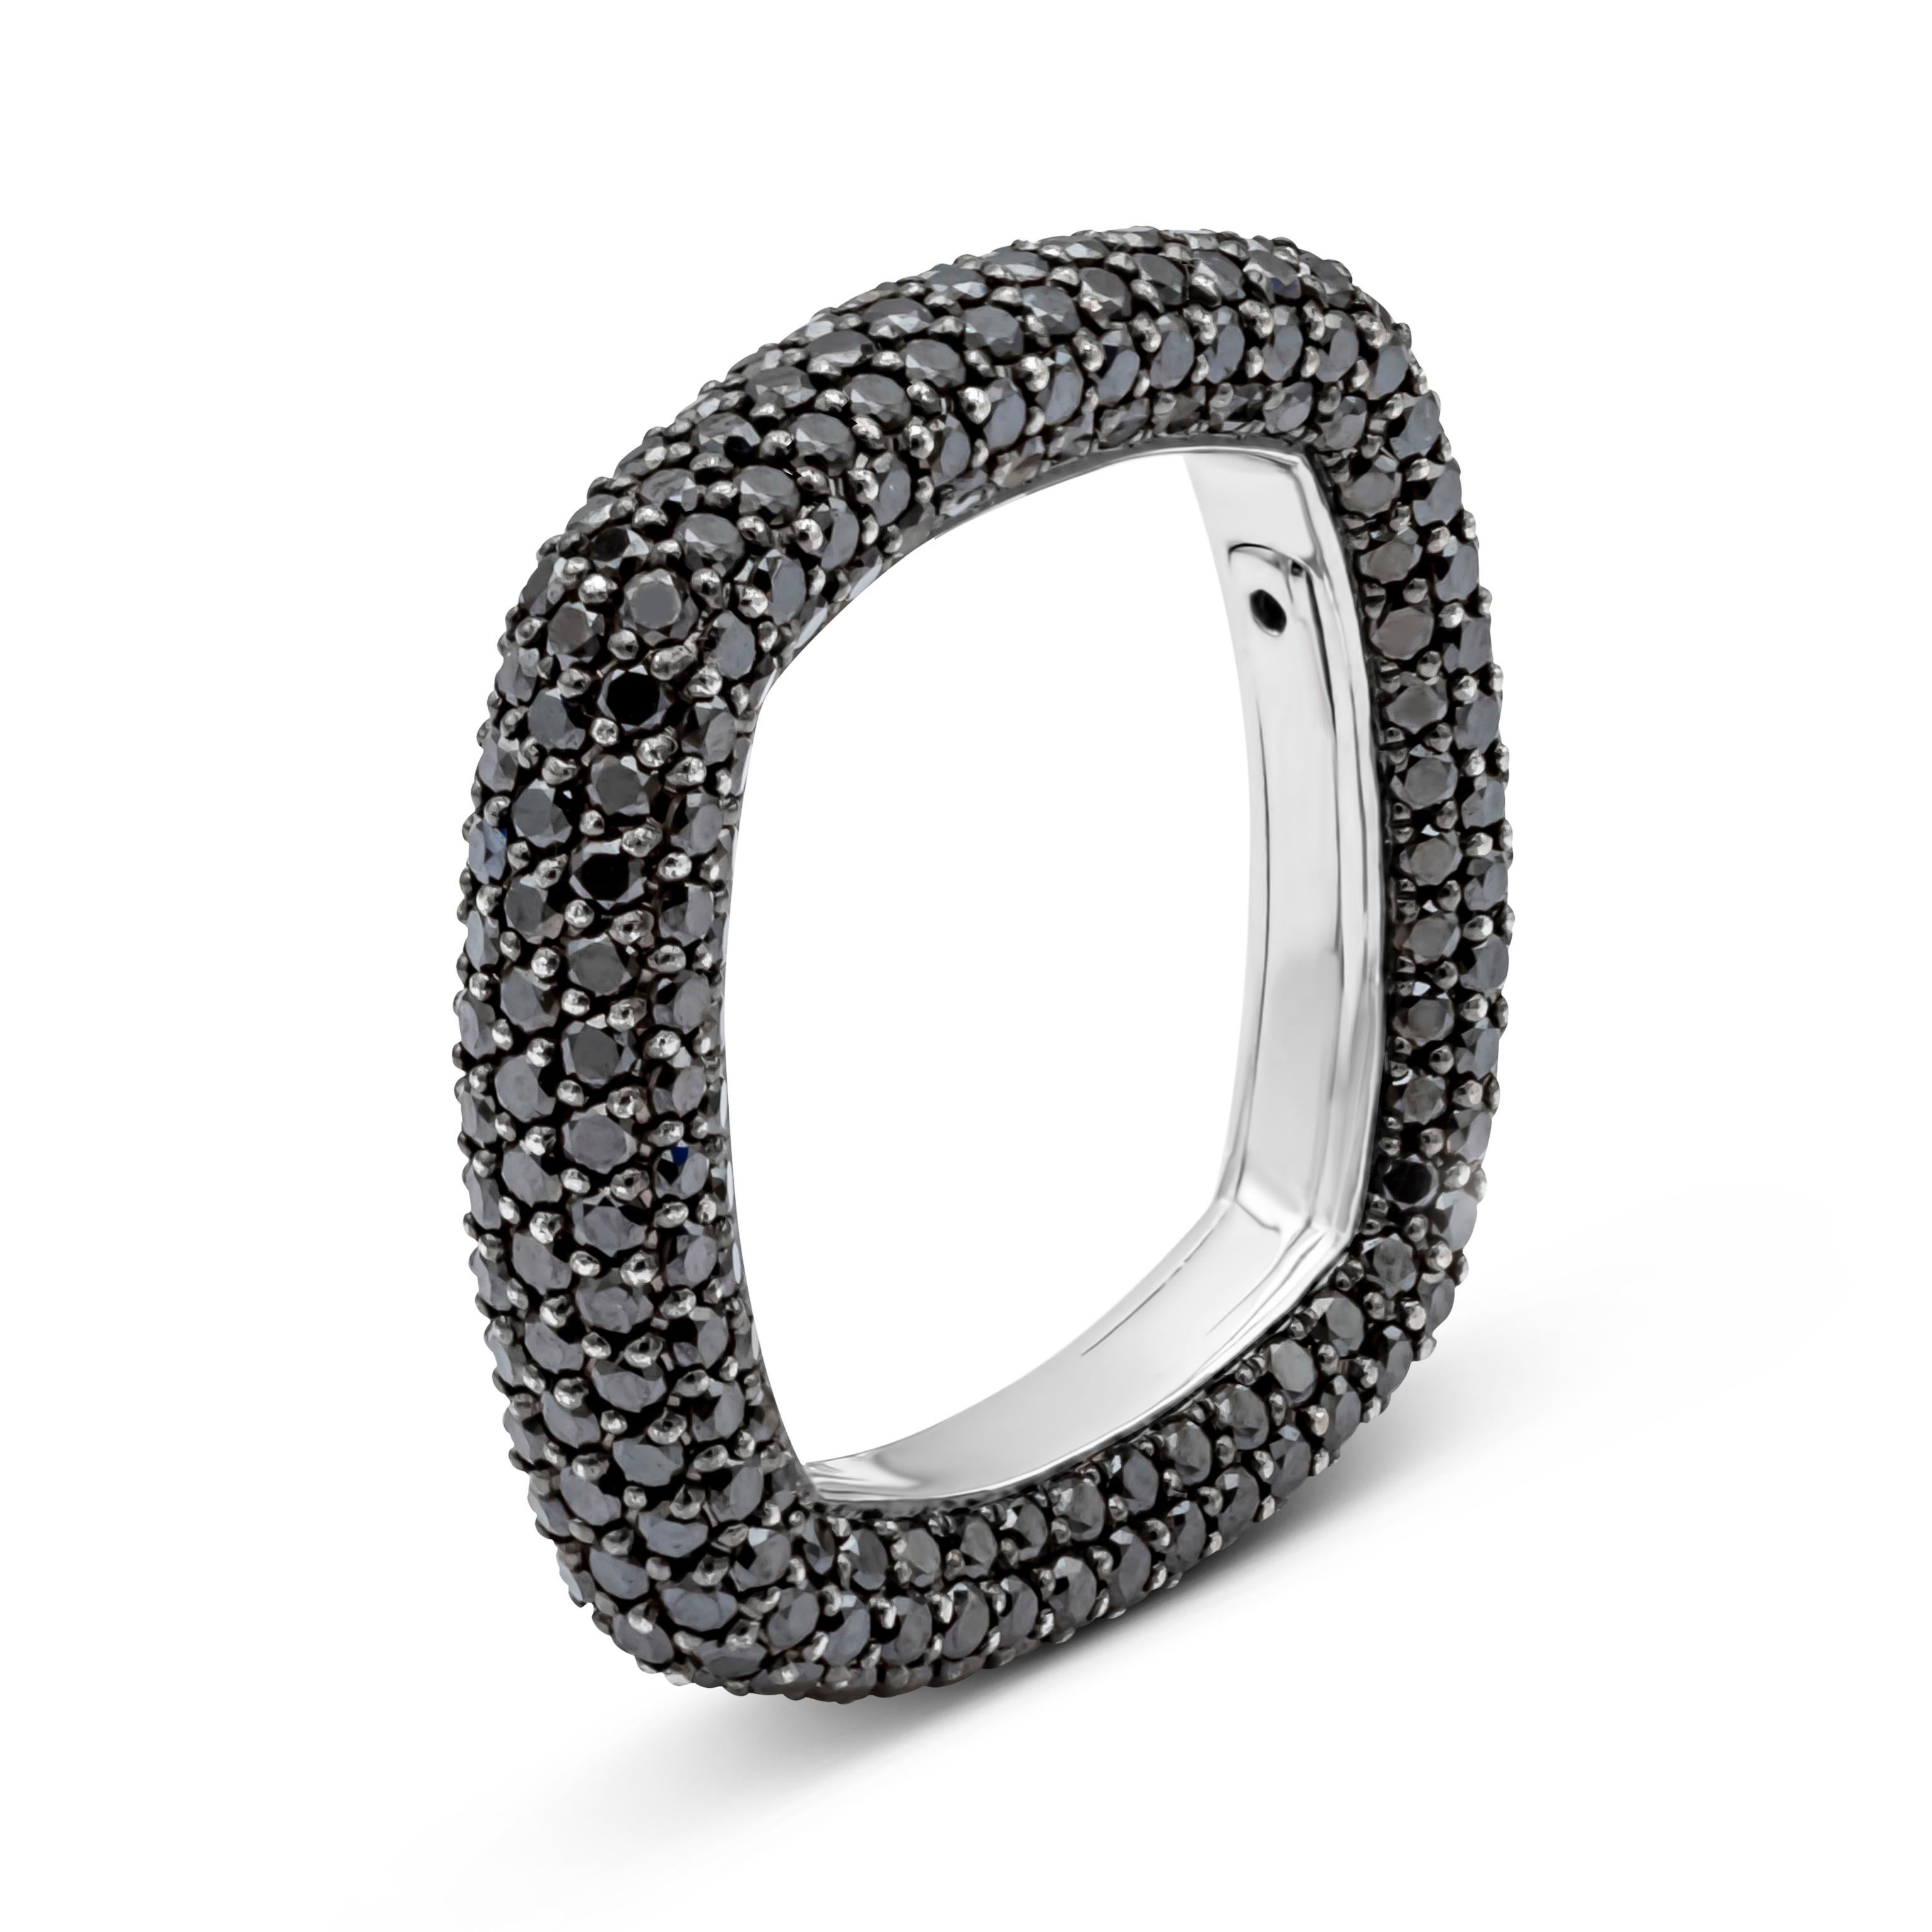 This fascinating and stylish fashion ring showcases 340 brilliant round cut black diamonds weighing 3.68 carats total, beautifully set in a micro-pave set square design and shared prong setting. Perfectly made in 18k white gold and Size 6.5 US